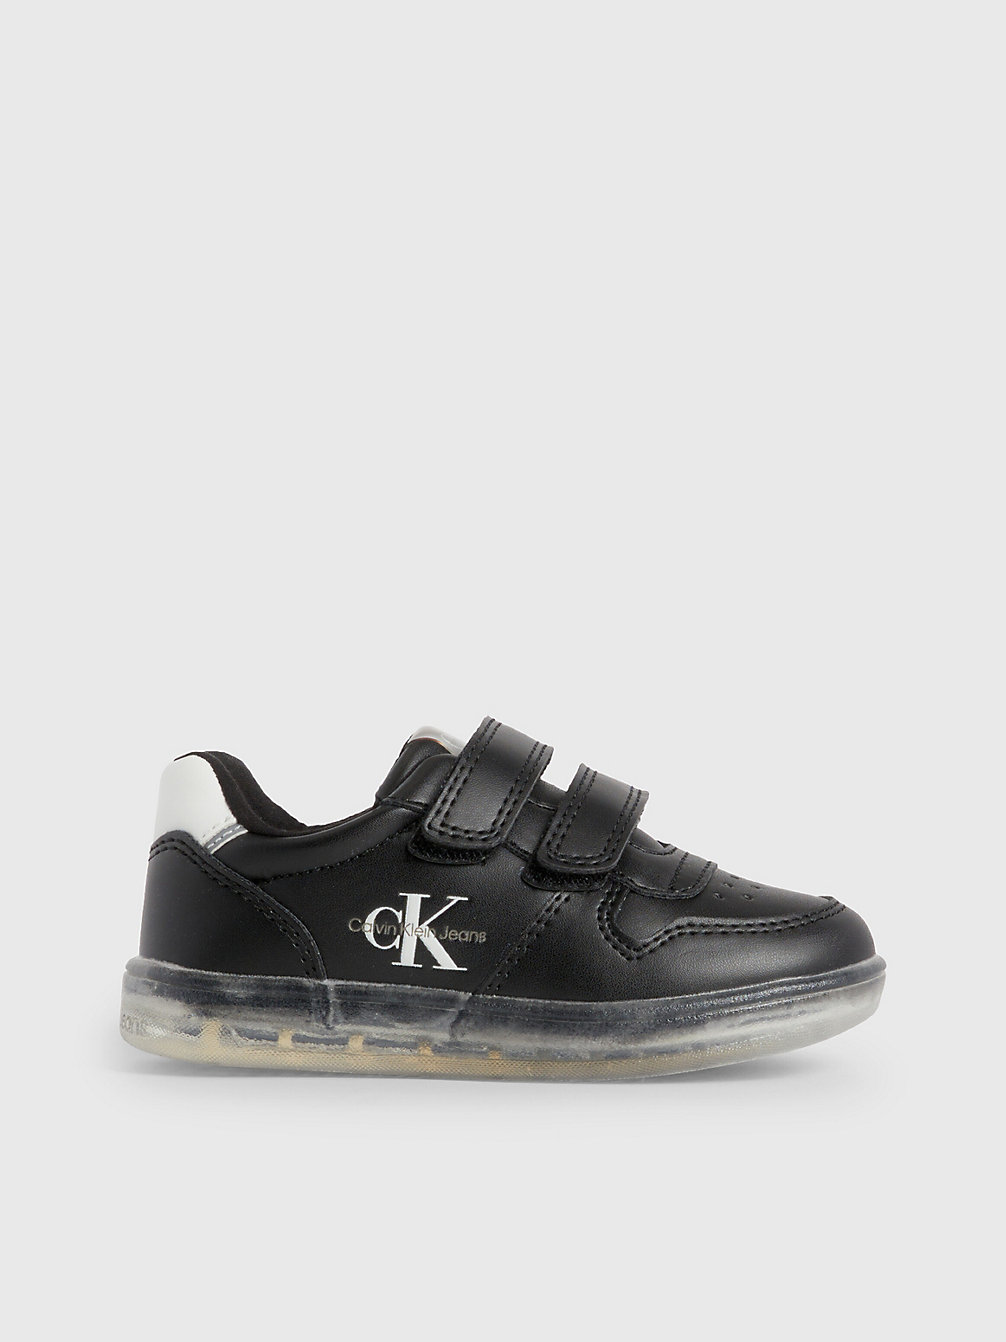 BLACK Toddlers And Kids Velcro Trainers undefined kids unisex Calvin Klein